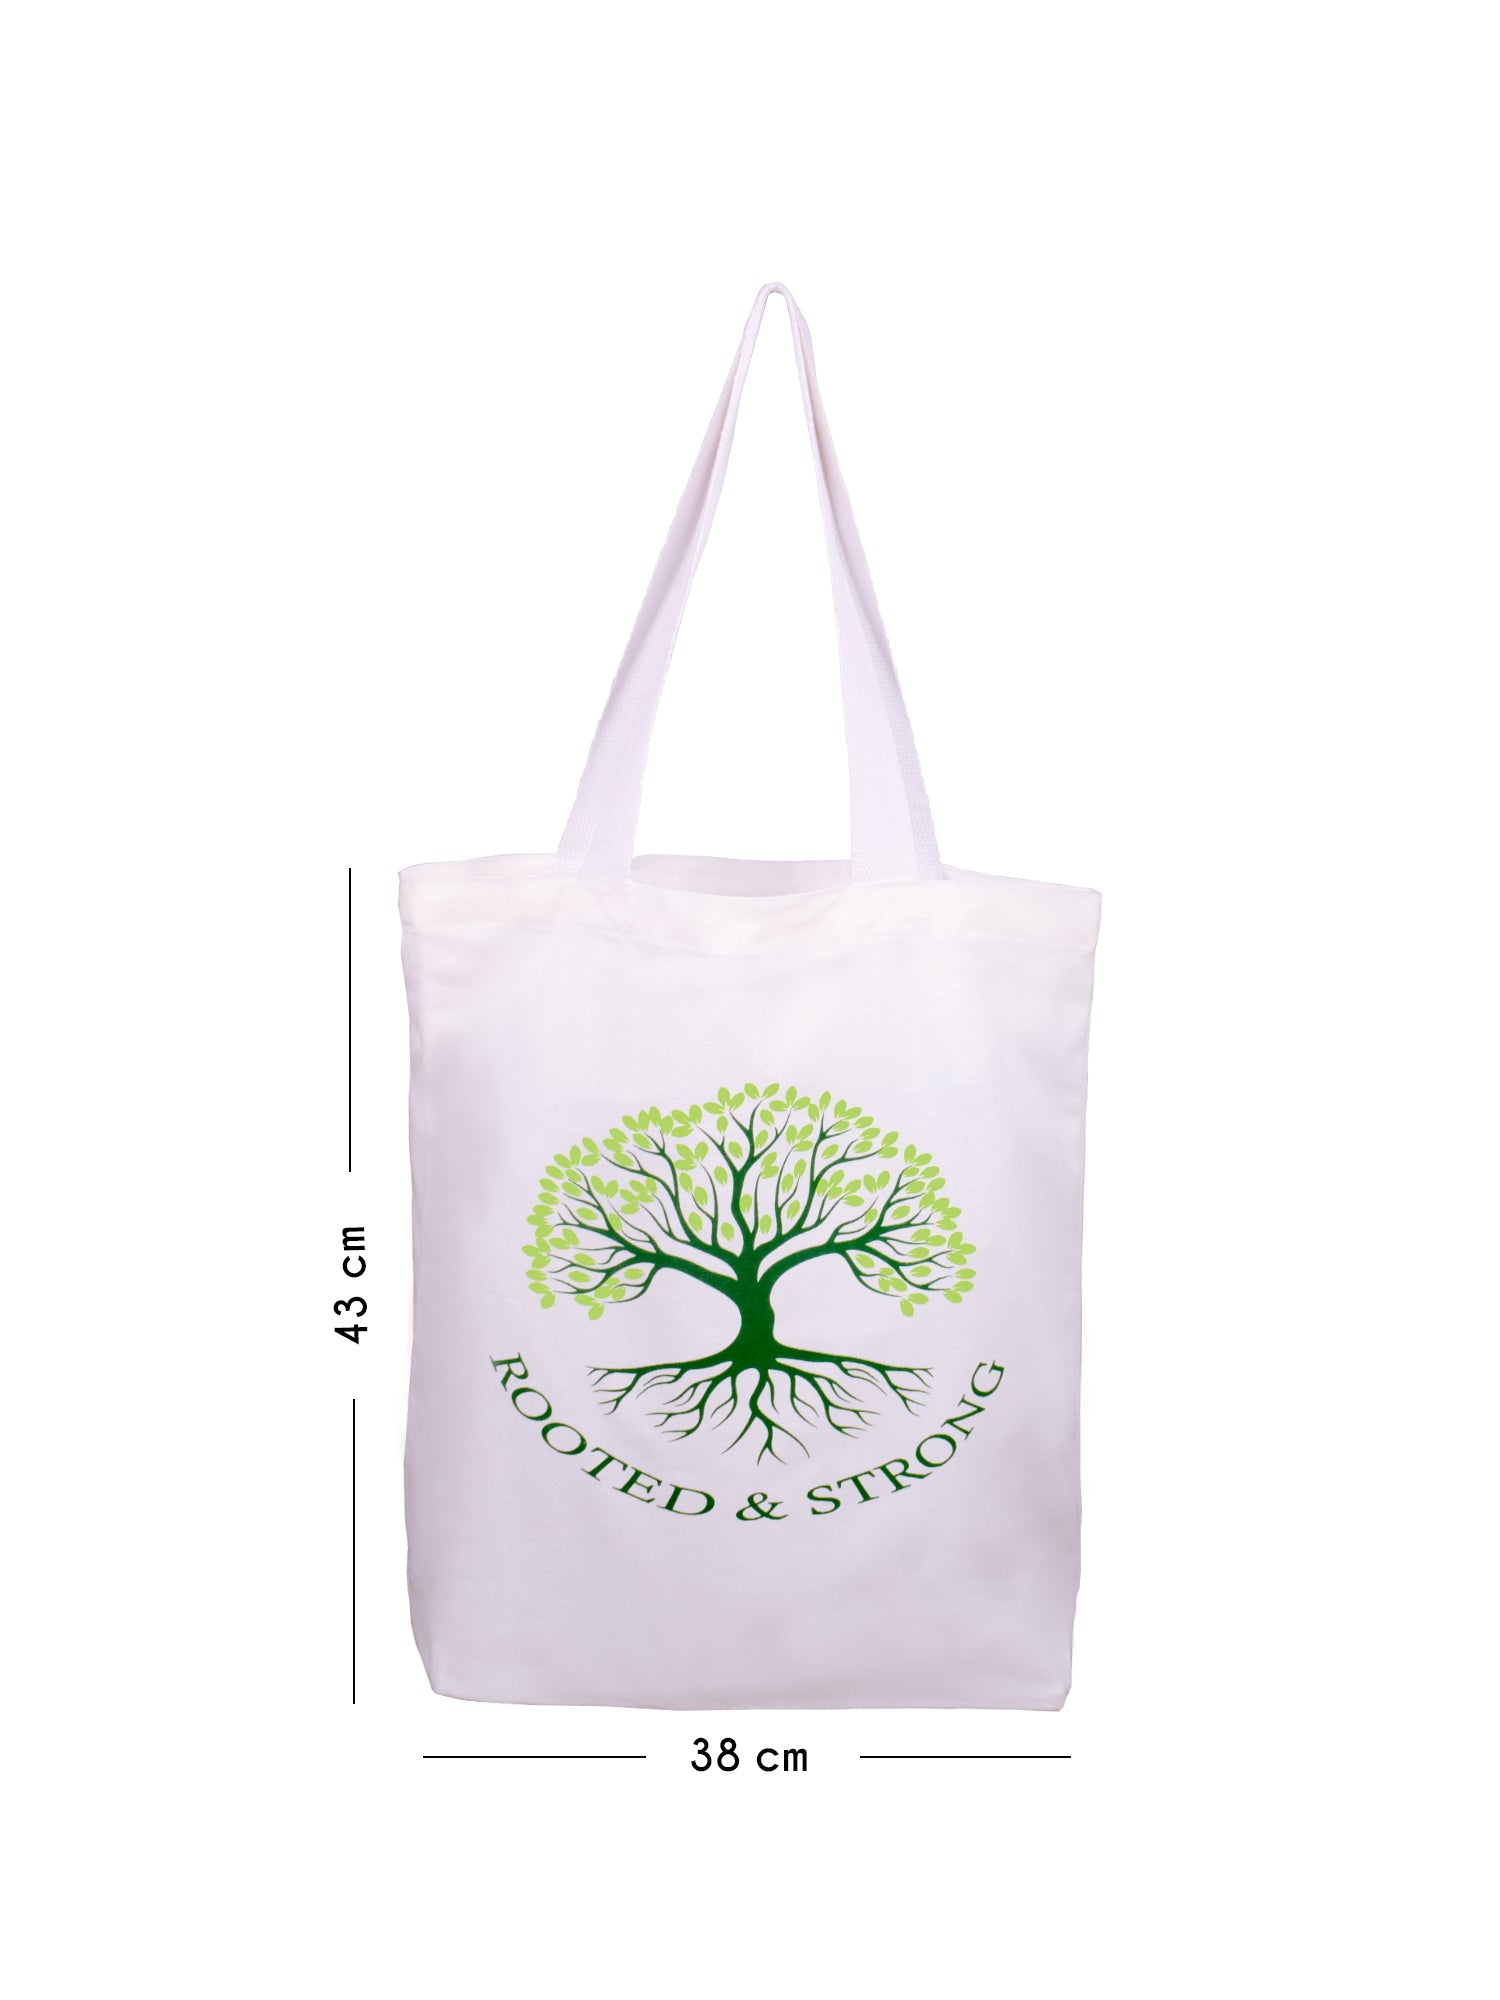 Rooted and Strong Tote Bag